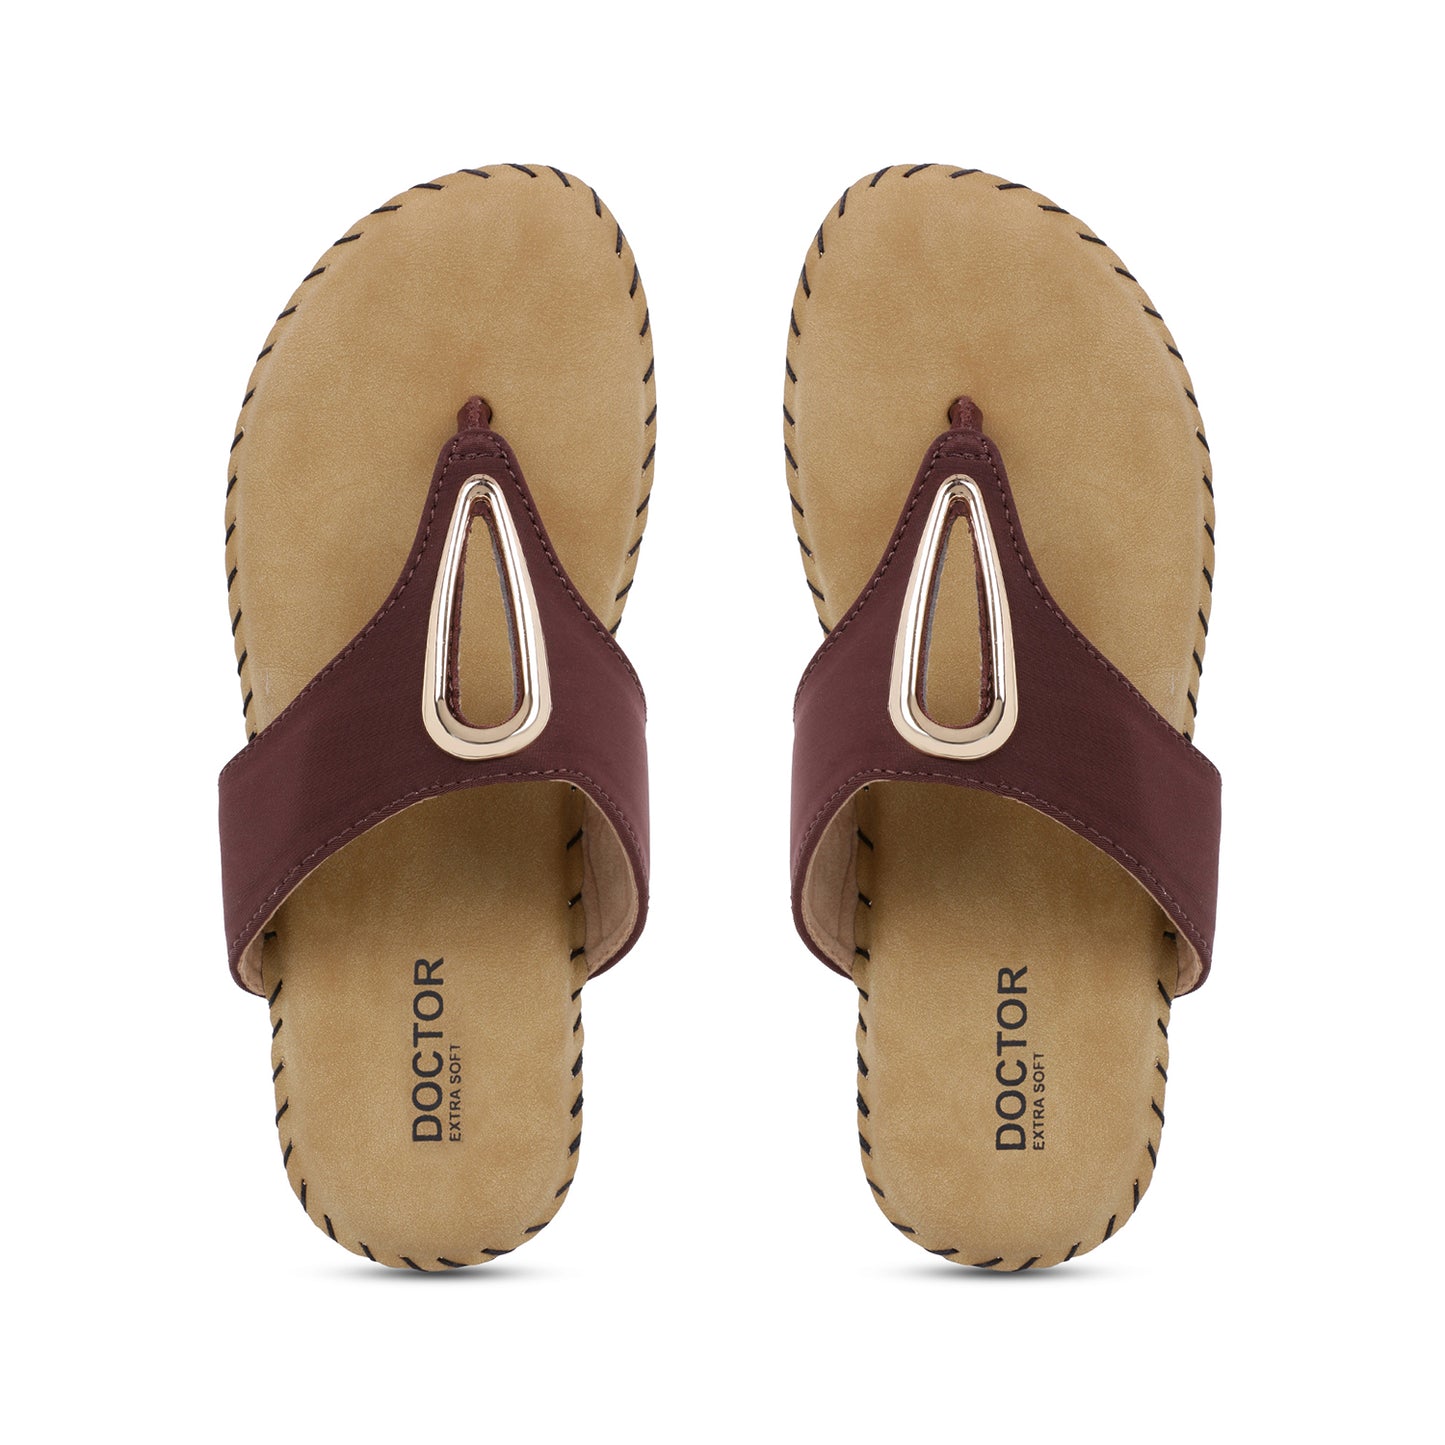 DOCTOR EXTRA SOFT ART-29 Women's Dr.Chappal For Ladies With Open Toe Style, Comfortable For Old Age & Foot Problems